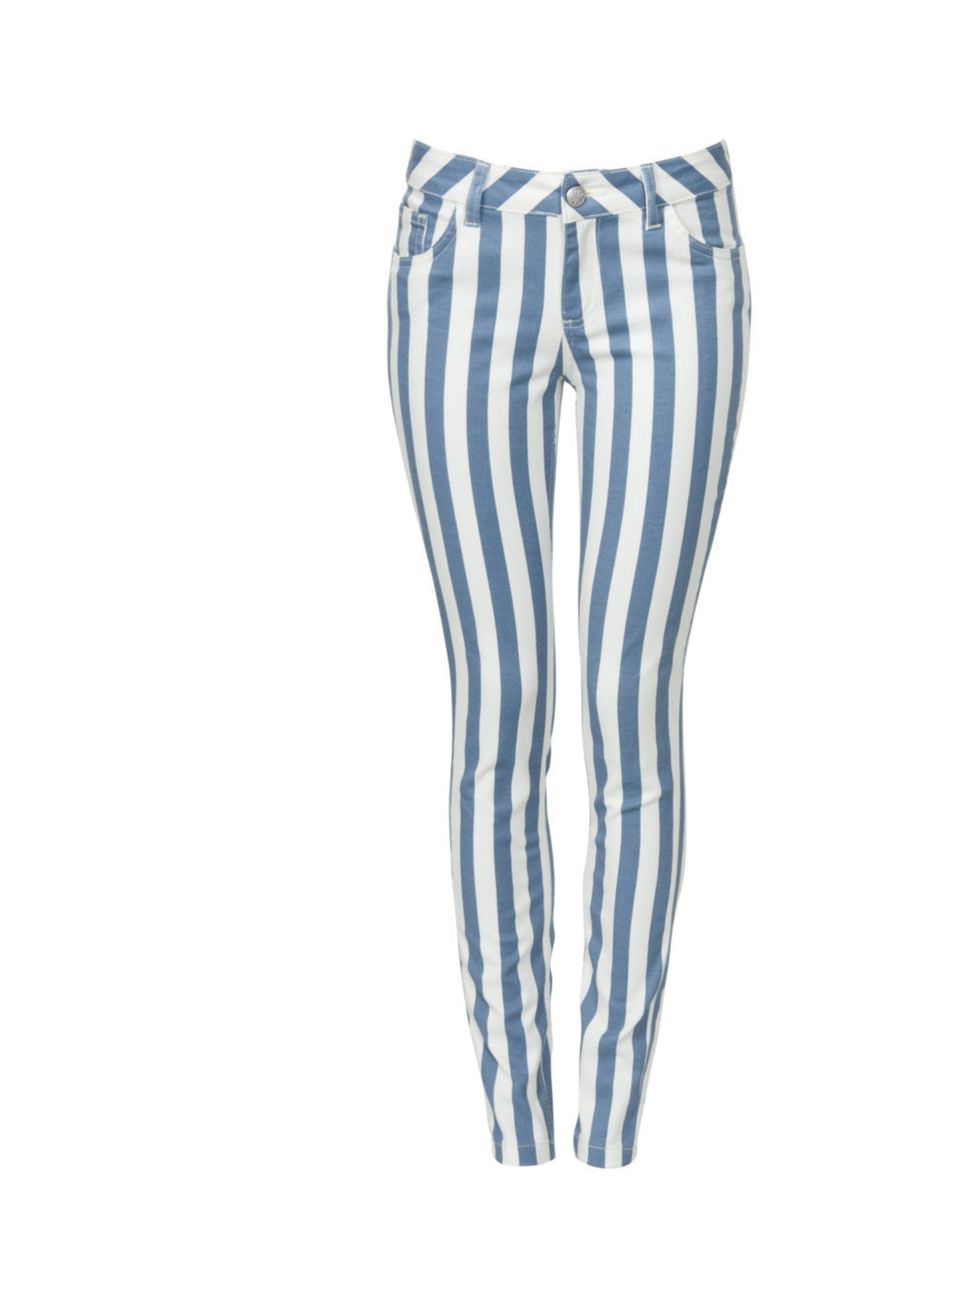 <p><a href="http://www.newlook.com/shop/womens/jeans/32in-blue-candy-stripe-skinny-jeans_271321349">New Look</a> blue striped jeans, £24.99</p>